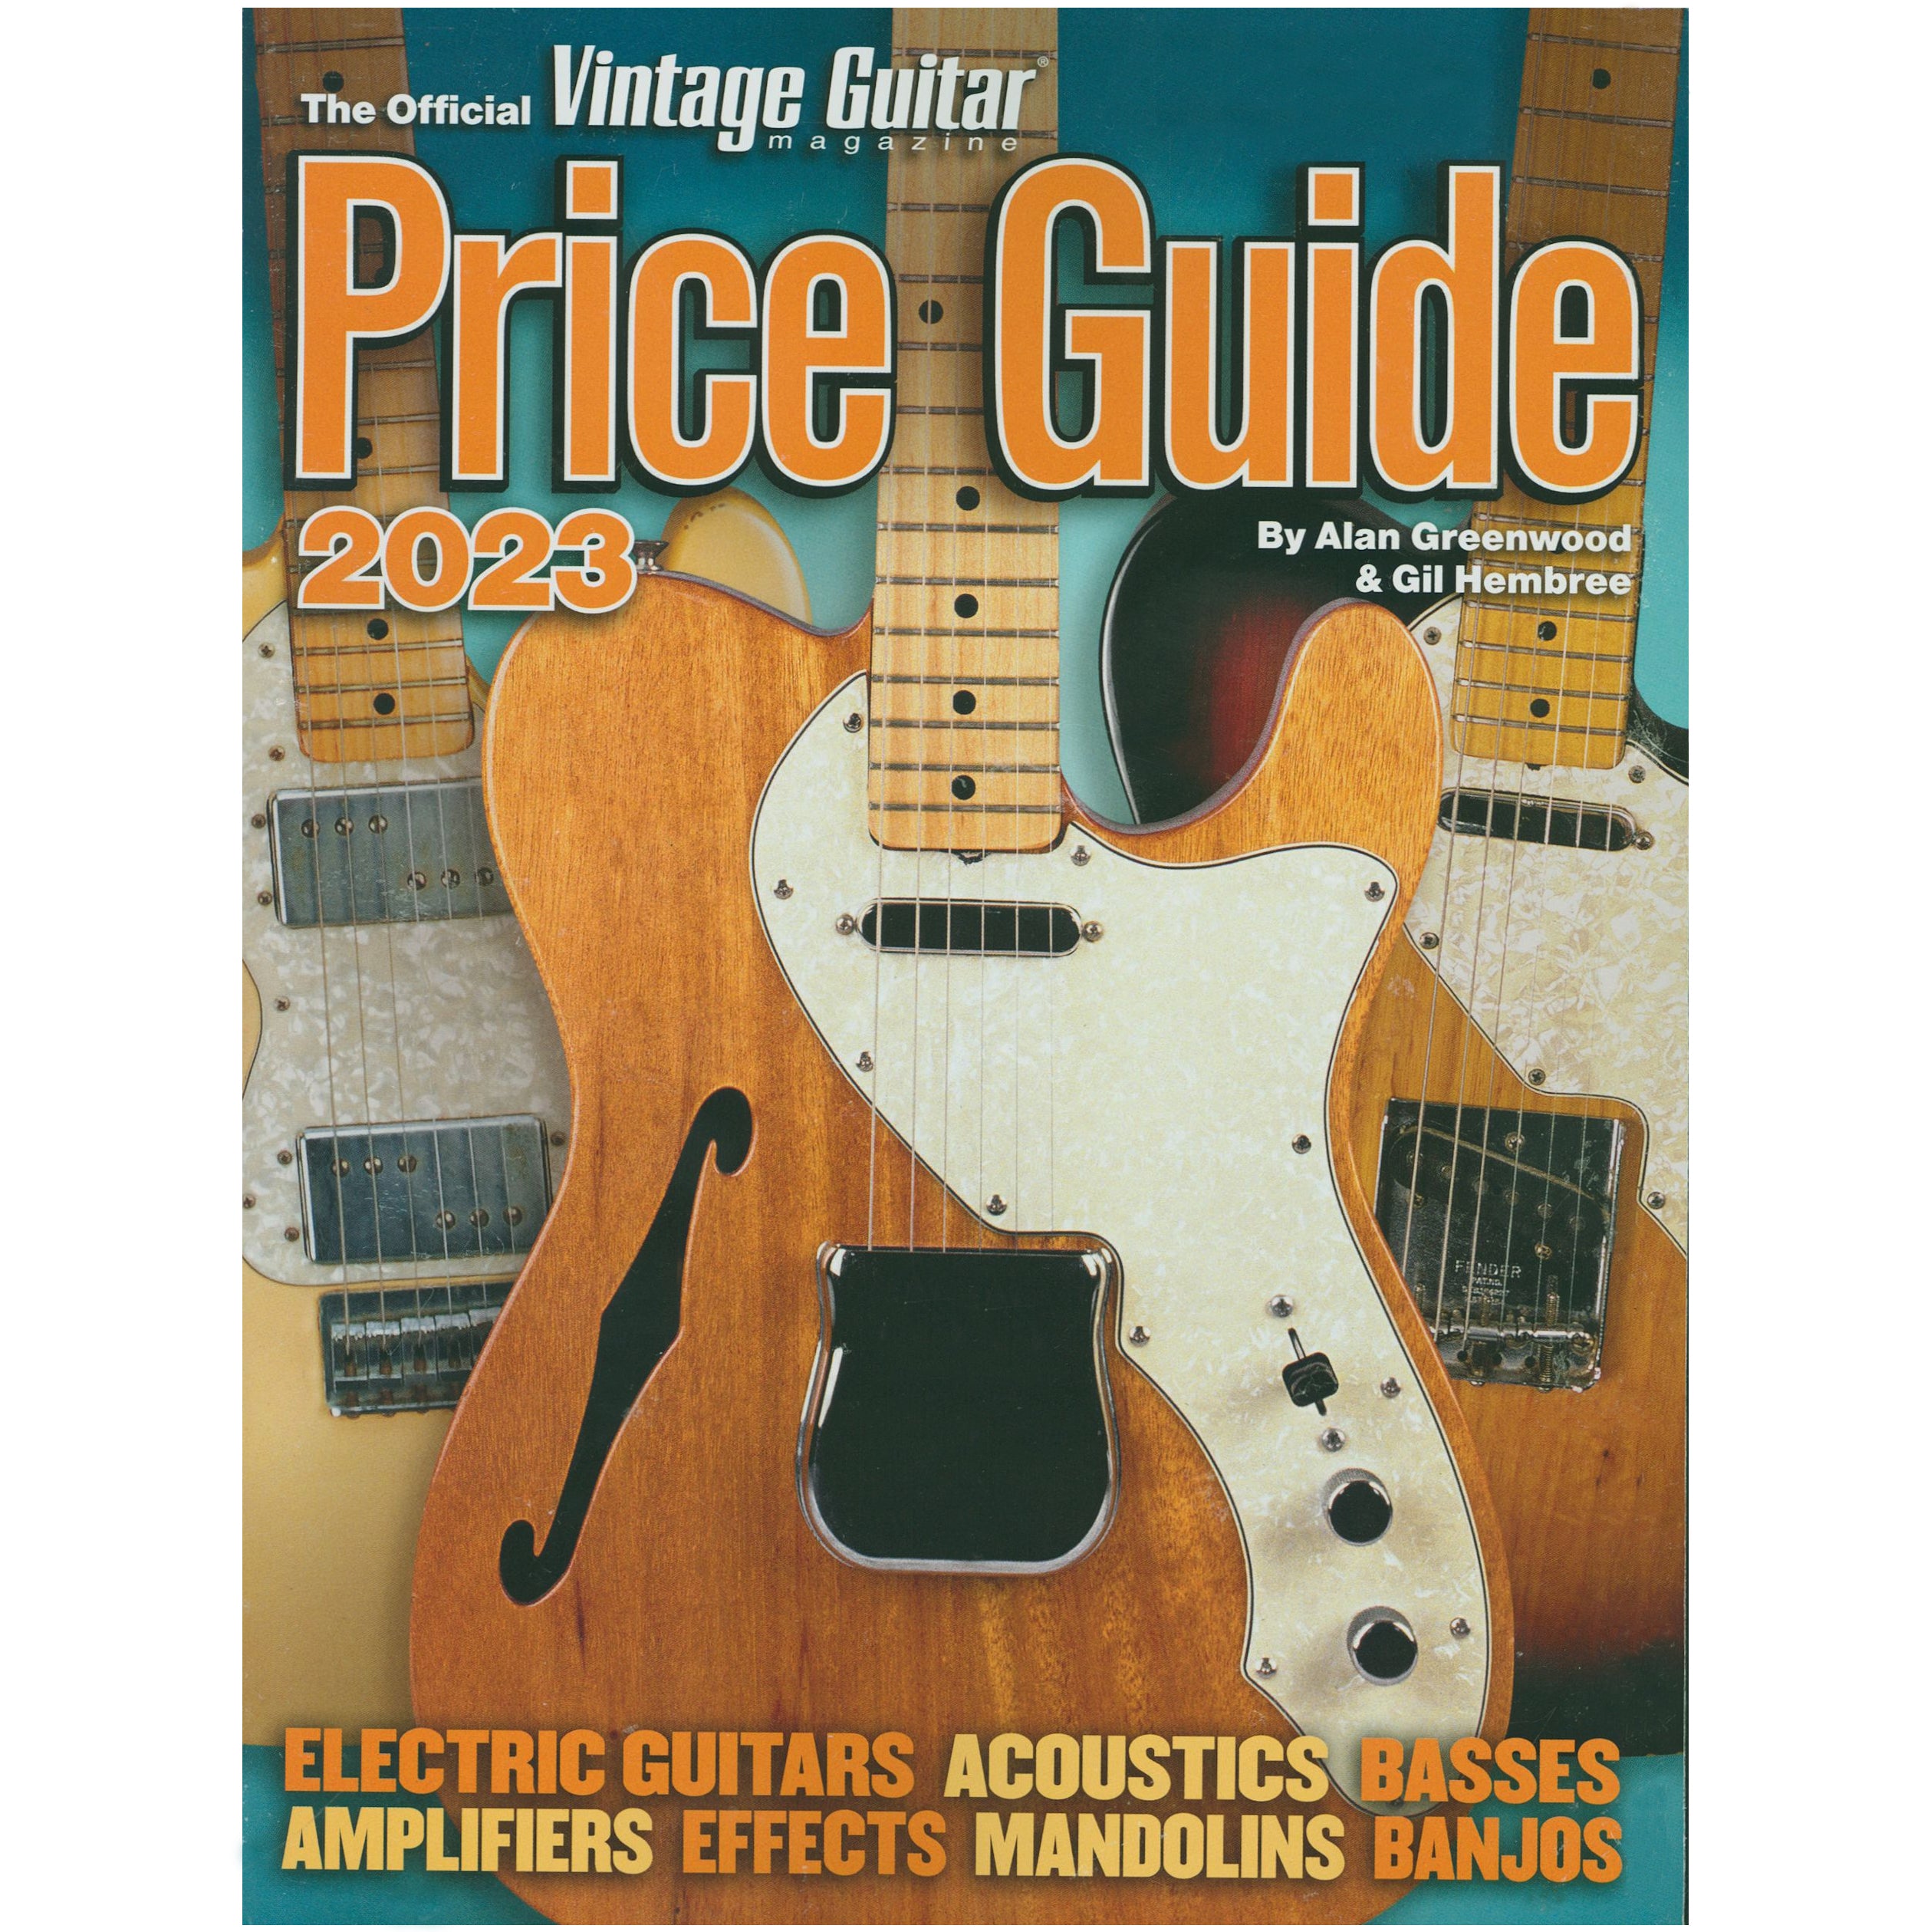 Vintage Guitar, The Official Vintage Guitar Magazine Price Guide 2023 with Digital Access Code